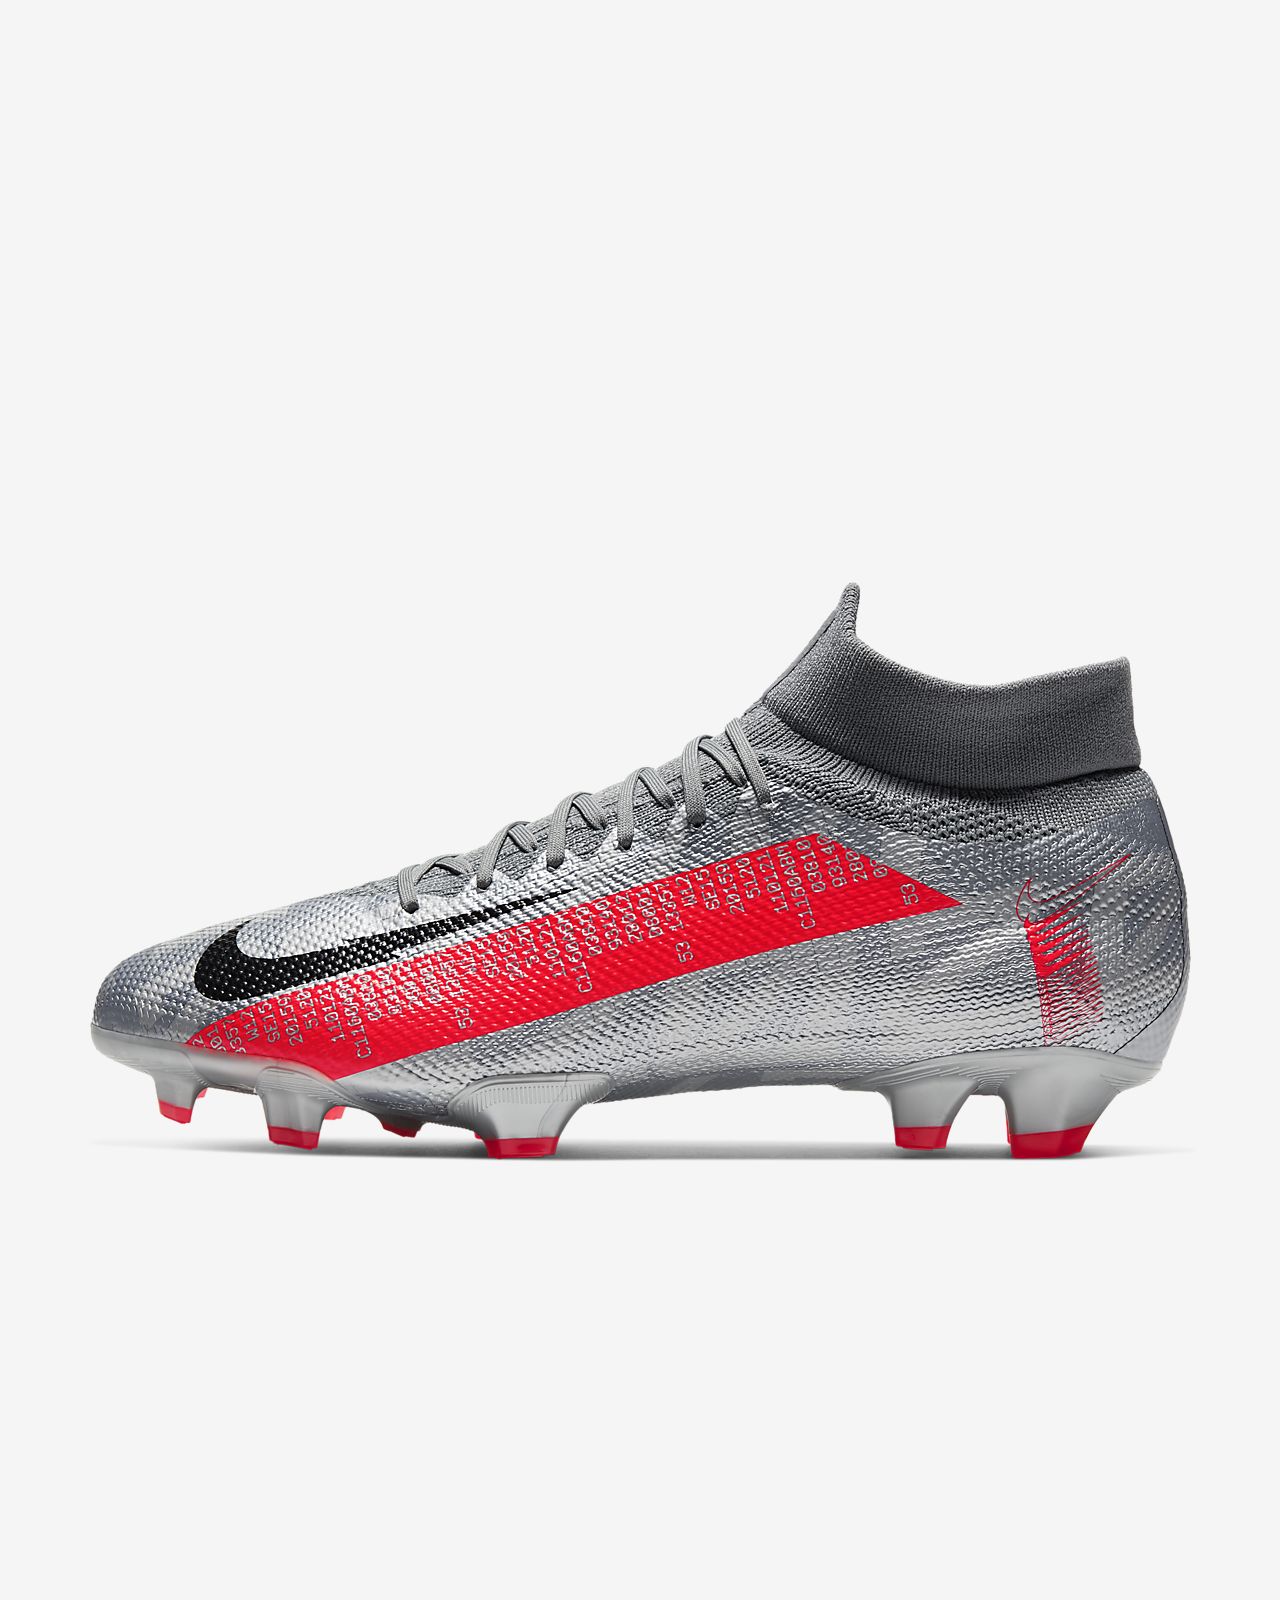 Nike Mercurial Superfly 7 Pro FG New Lights